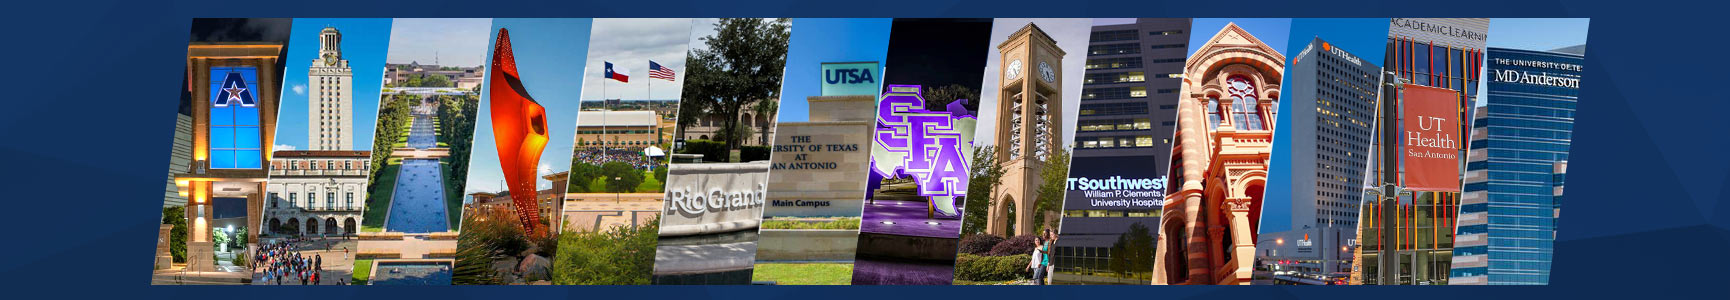 A collage of 13 photos showcasing the exterior of the institutions of The Univerity of Texas System.